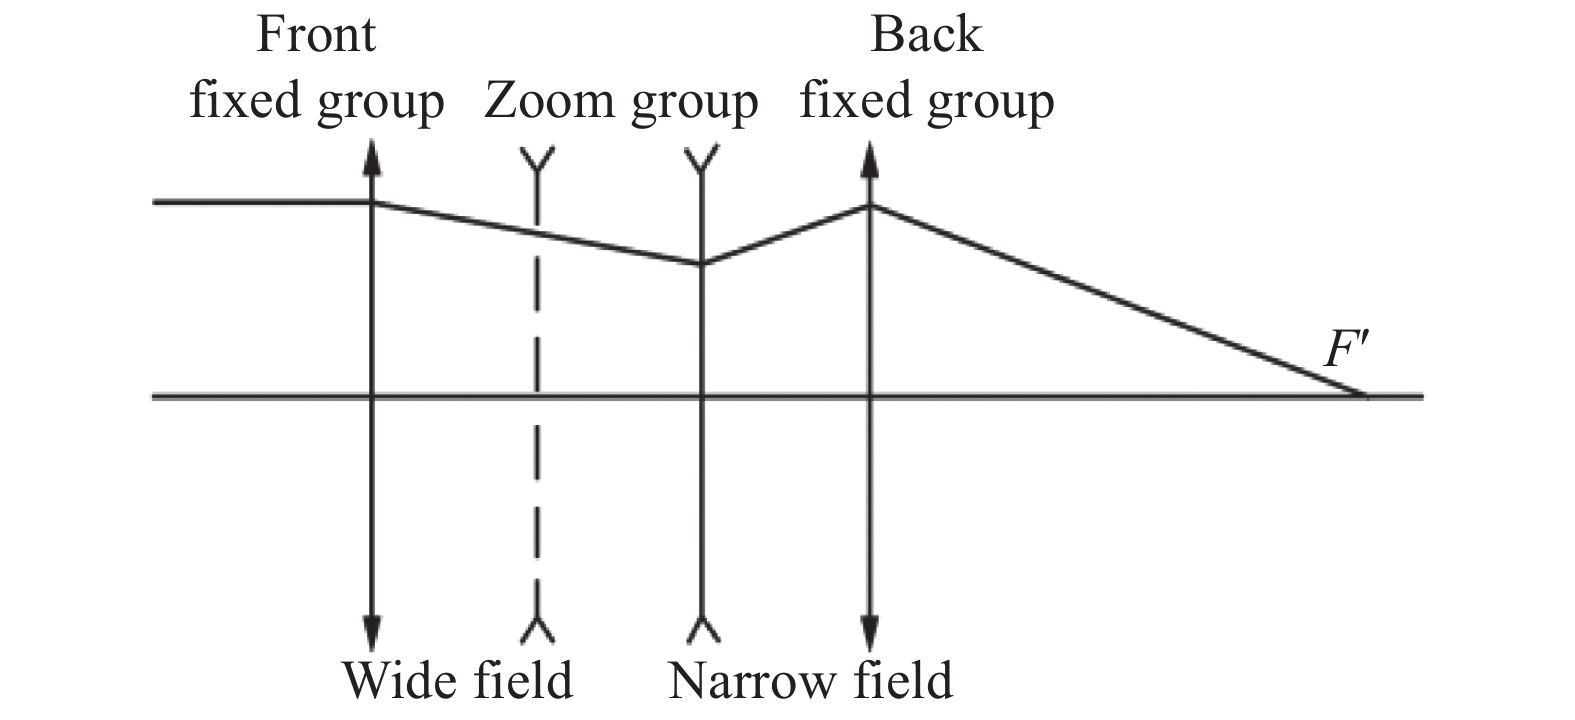 Axial motion zoom